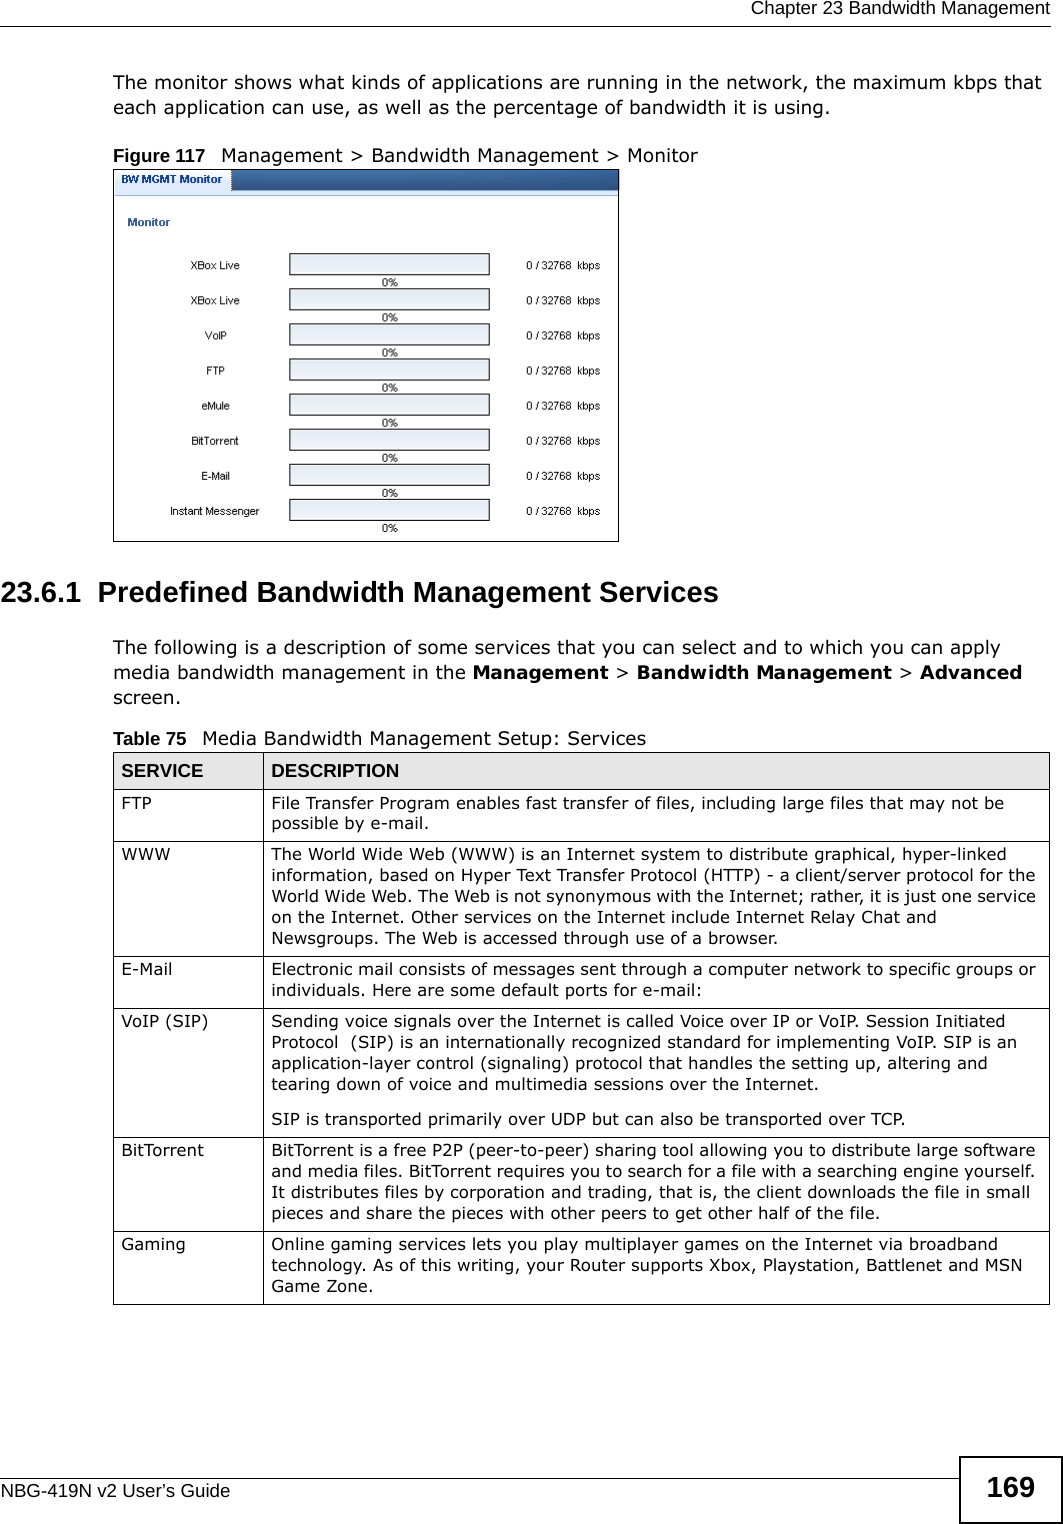  Chapter 23 Bandwidth ManagementNBG-419N v2 User’s Guide 169The monitor shows what kinds of applications are running in the network, the maximum kbps that each application can use, as well as the percentage of bandwidth it is using. Figure 117   Management &gt; Bandwidth Management &gt; Monitor23.6.1  Predefined Bandwidth Management ServicesThe following is a description of some services that you can select and to which you can apply media bandwidth management in the Management &gt; Bandwidth Management &gt; Advanced screen.  Table 75   Media Bandwidth Management Setup: ServicesSERVICE DESCRIPTIONFTP File Transfer Program enables fast transfer of files, including large files that may not be possible by e-mail.WWW The World Wide Web (WWW) is an Internet system to distribute graphical, hyper-linked information, based on Hyper Text Transfer Protocol (HTTP) - a client/server protocol for the World Wide Web. The Web is not synonymous with the Internet; rather, it is just one service on the Internet. Other services on the Internet include Internet Relay Chat and Newsgroups. The Web is accessed through use of a browser. E-Mail Electronic mail consists of messages sent through a computer network to specific groups or individuals. Here are some default ports for e-mail: VoIP (SIP) Sending voice signals over the Internet is called Voice over IP or VoIP. Session Initiated Protocol  (SIP) is an internationally recognized standard for implementing VoIP. SIP is an application-layer control (signaling) protocol that handles the setting up, altering and tearing down of voice and multimedia sessions over the Internet.SIP is transported primarily over UDP but can also be transported over TCP. BitTorrent BitTorrent is a free P2P (peer-to-peer) sharing tool allowing you to distribute large software and media files. BitTorrent requires you to search for a file with a searching engine yourself. It distributes files by corporation and trading, that is, the client downloads the file in small pieces and share the pieces with other peers to get other half of the file.Gaming Online gaming services lets you play multiplayer games on the Internet via broadband technology. As of this writing, your Router supports Xbox, Playstation, Battlenet and MSN Game Zone.